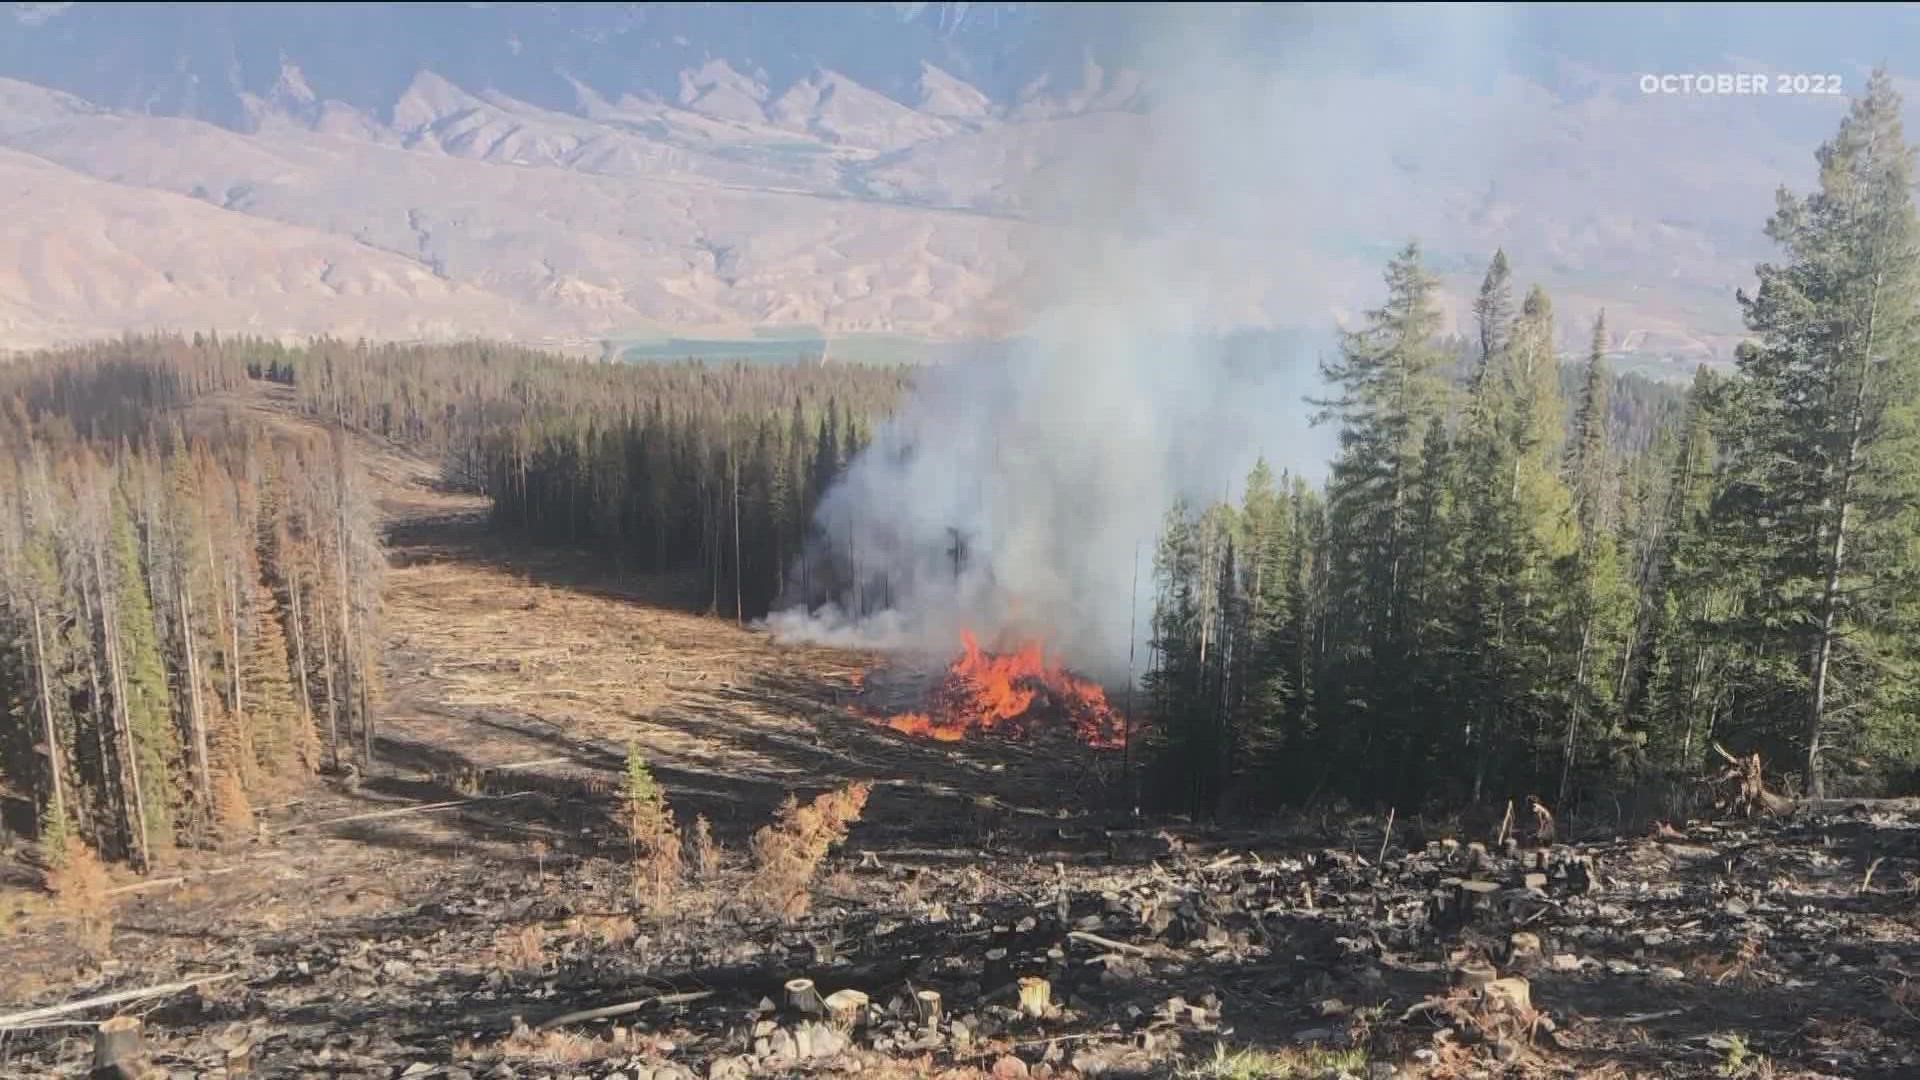 Idaho's largest wildfire of 2022, northwest of Salmon, has burned about 130,000 acres since mid-July.